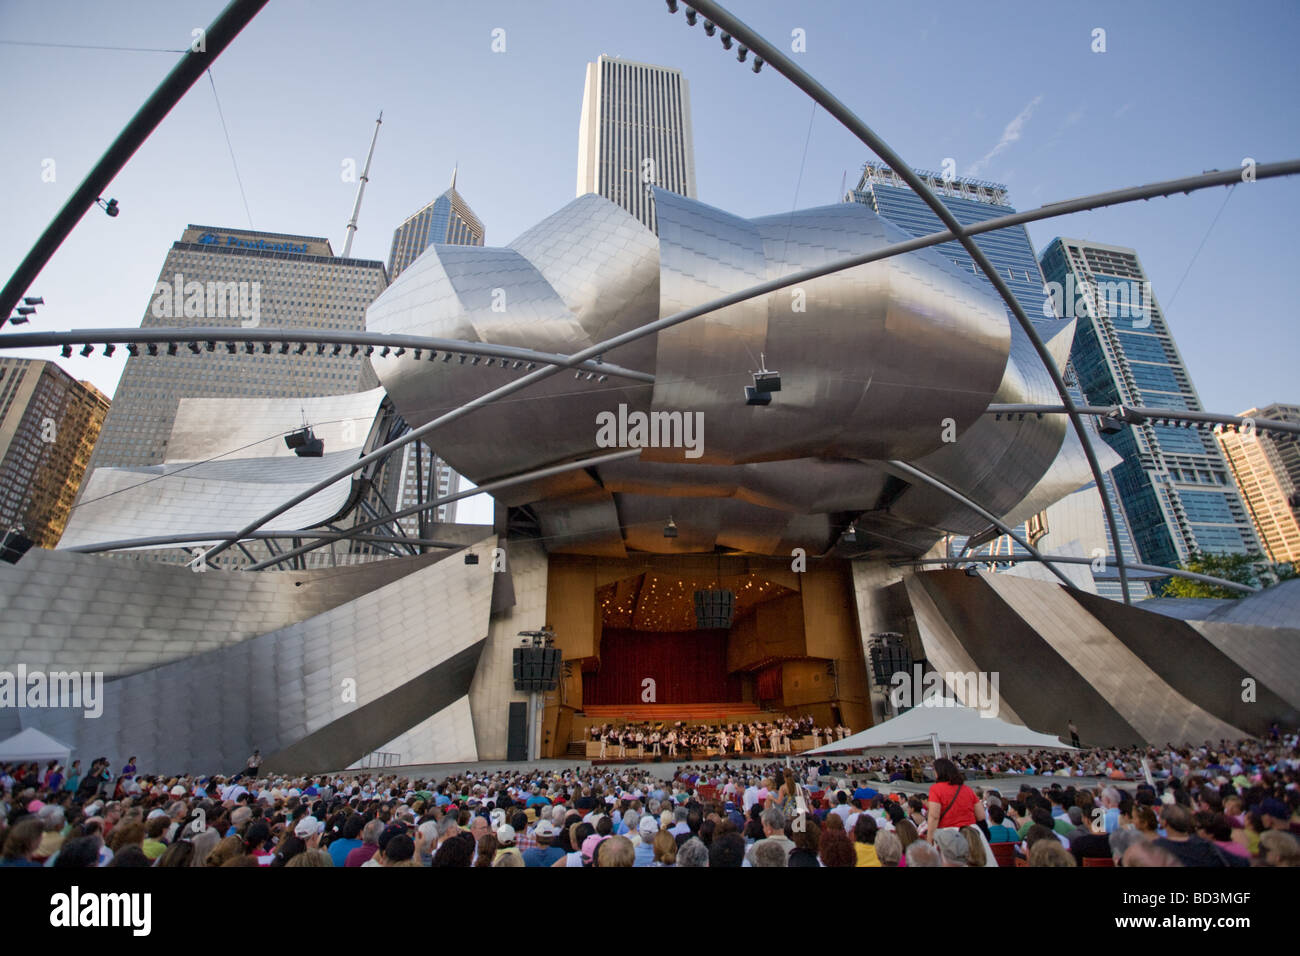 A free concert in Jay Pritzker Pavilion amphitheater by architect Frank Gehry in Millenium Park Chicago Illinois Stock Photo